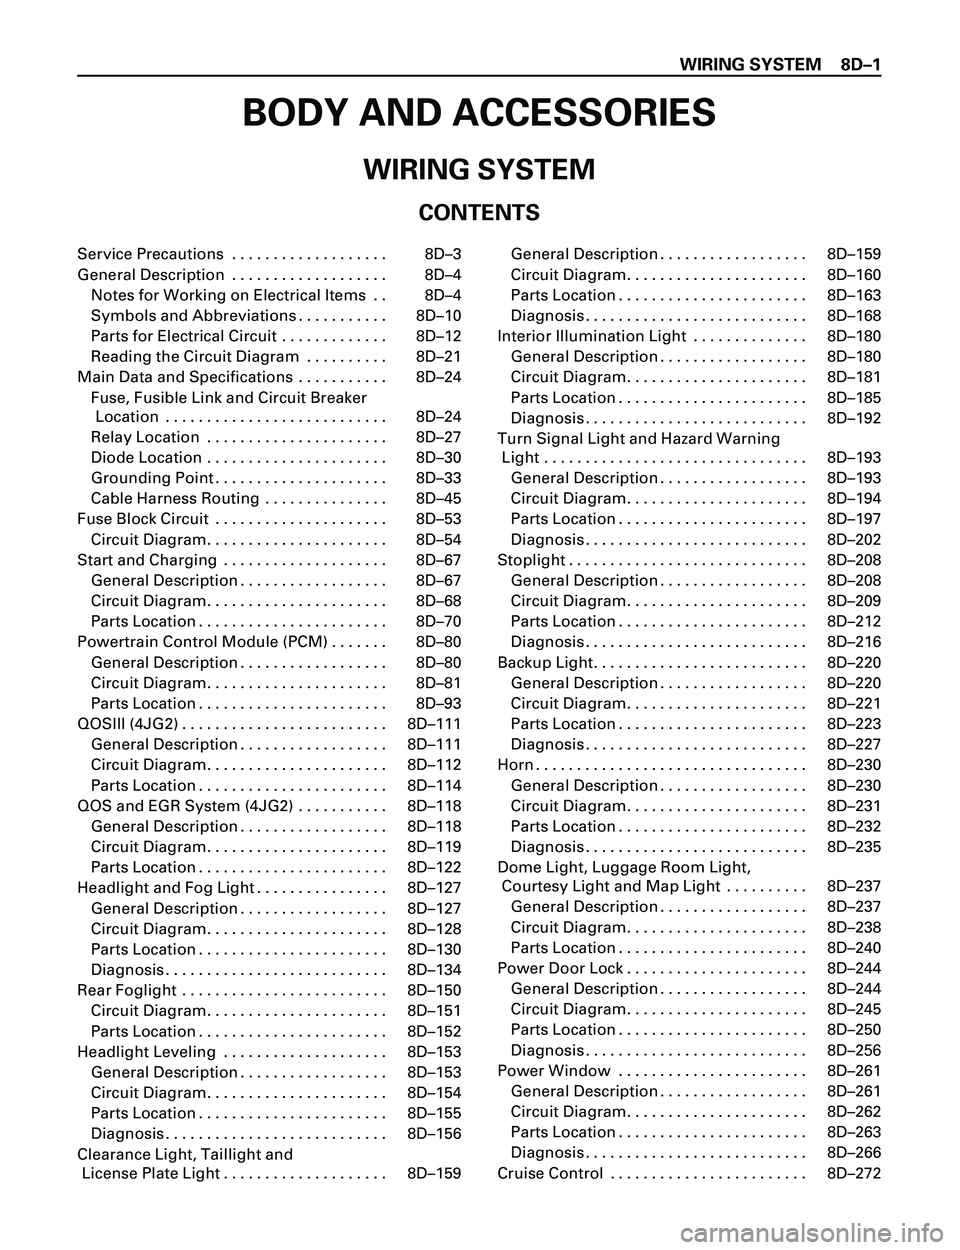 ISUZU TROOPER 1998  Service Manual Online WIRING SYSTEM 8DÐ1
BODY AND ACCESSORIES
WIRING SYSTEM
CONTENTS
Service Precautions  . . . . . . . . . . . . . . . . . . .  8DÐ3 
General Description  . . . . . . . . . . . . . . . . . . .  8DÐ4Note